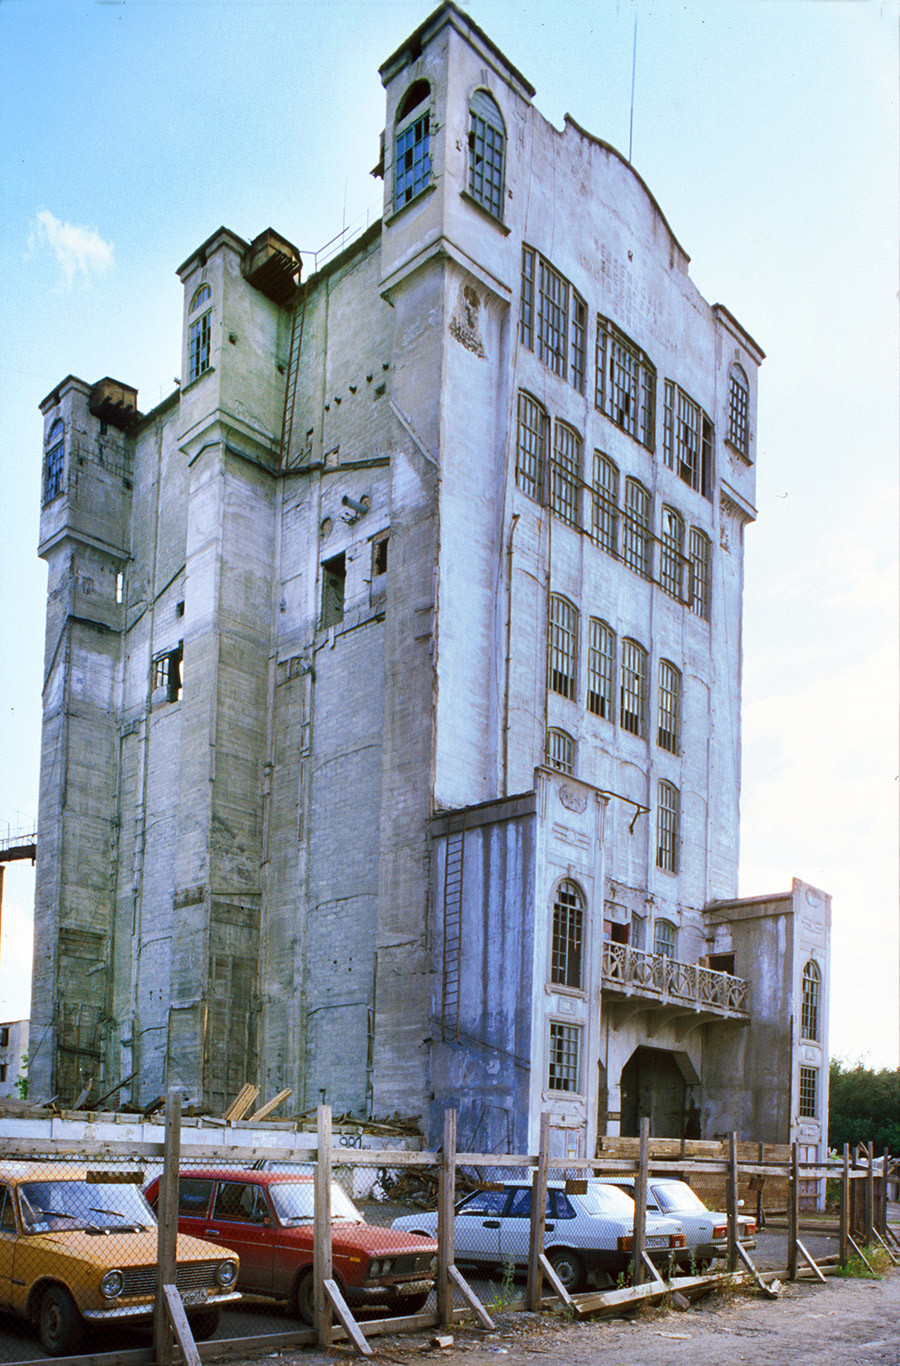 State Bank Grain Elevator. Built in 1914-16 with advanced reinforced concrete technology as part of a national program for grain storage centers. Used until 1990s, then partially demolished. July 12, 2003.